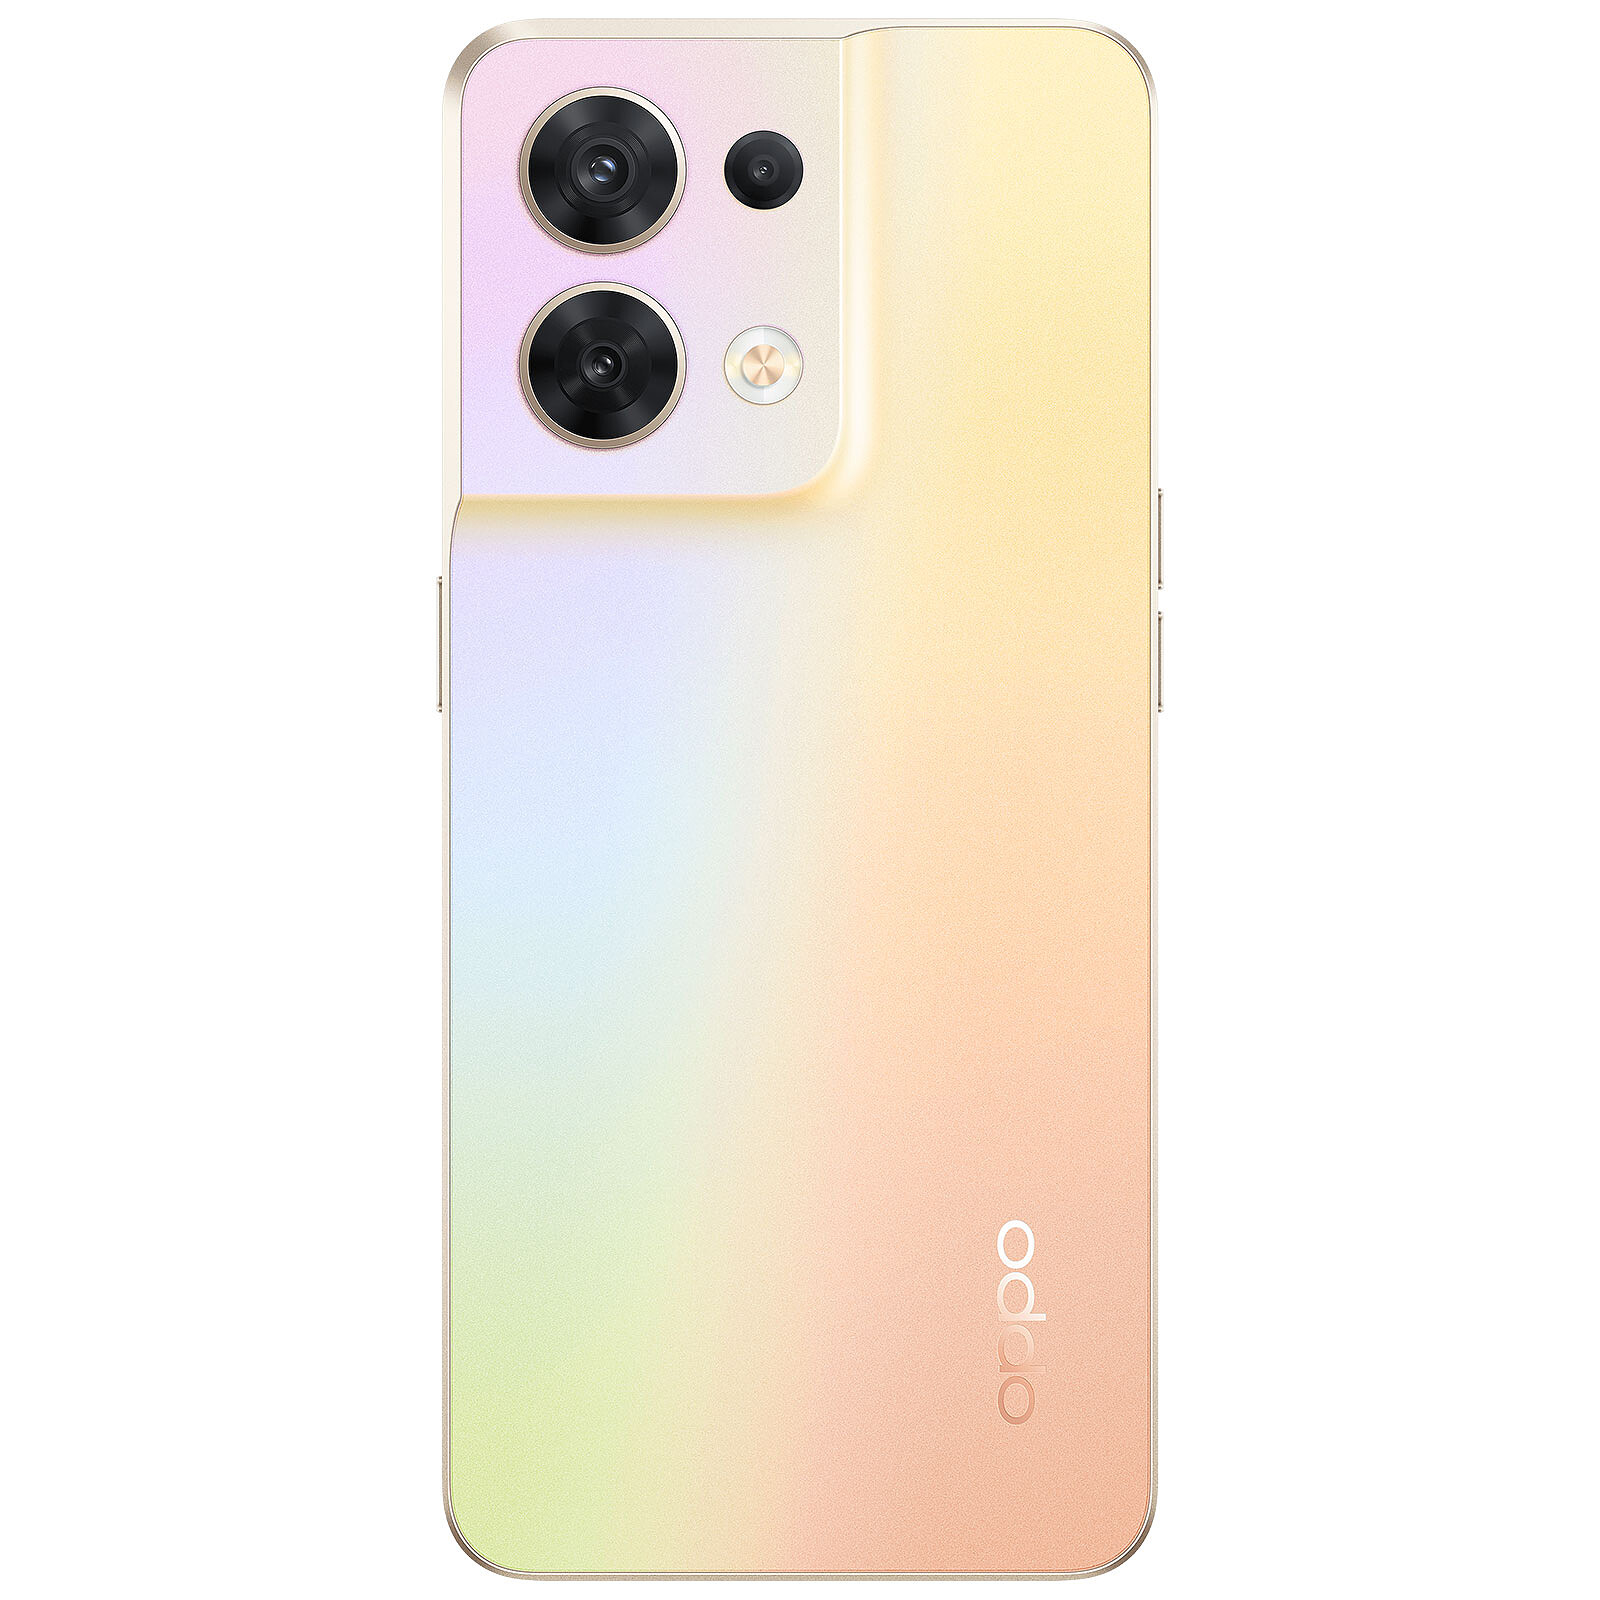 OPPO Find X5 5G White - Mobile phone & smartphone - LDLC 3-year warranty